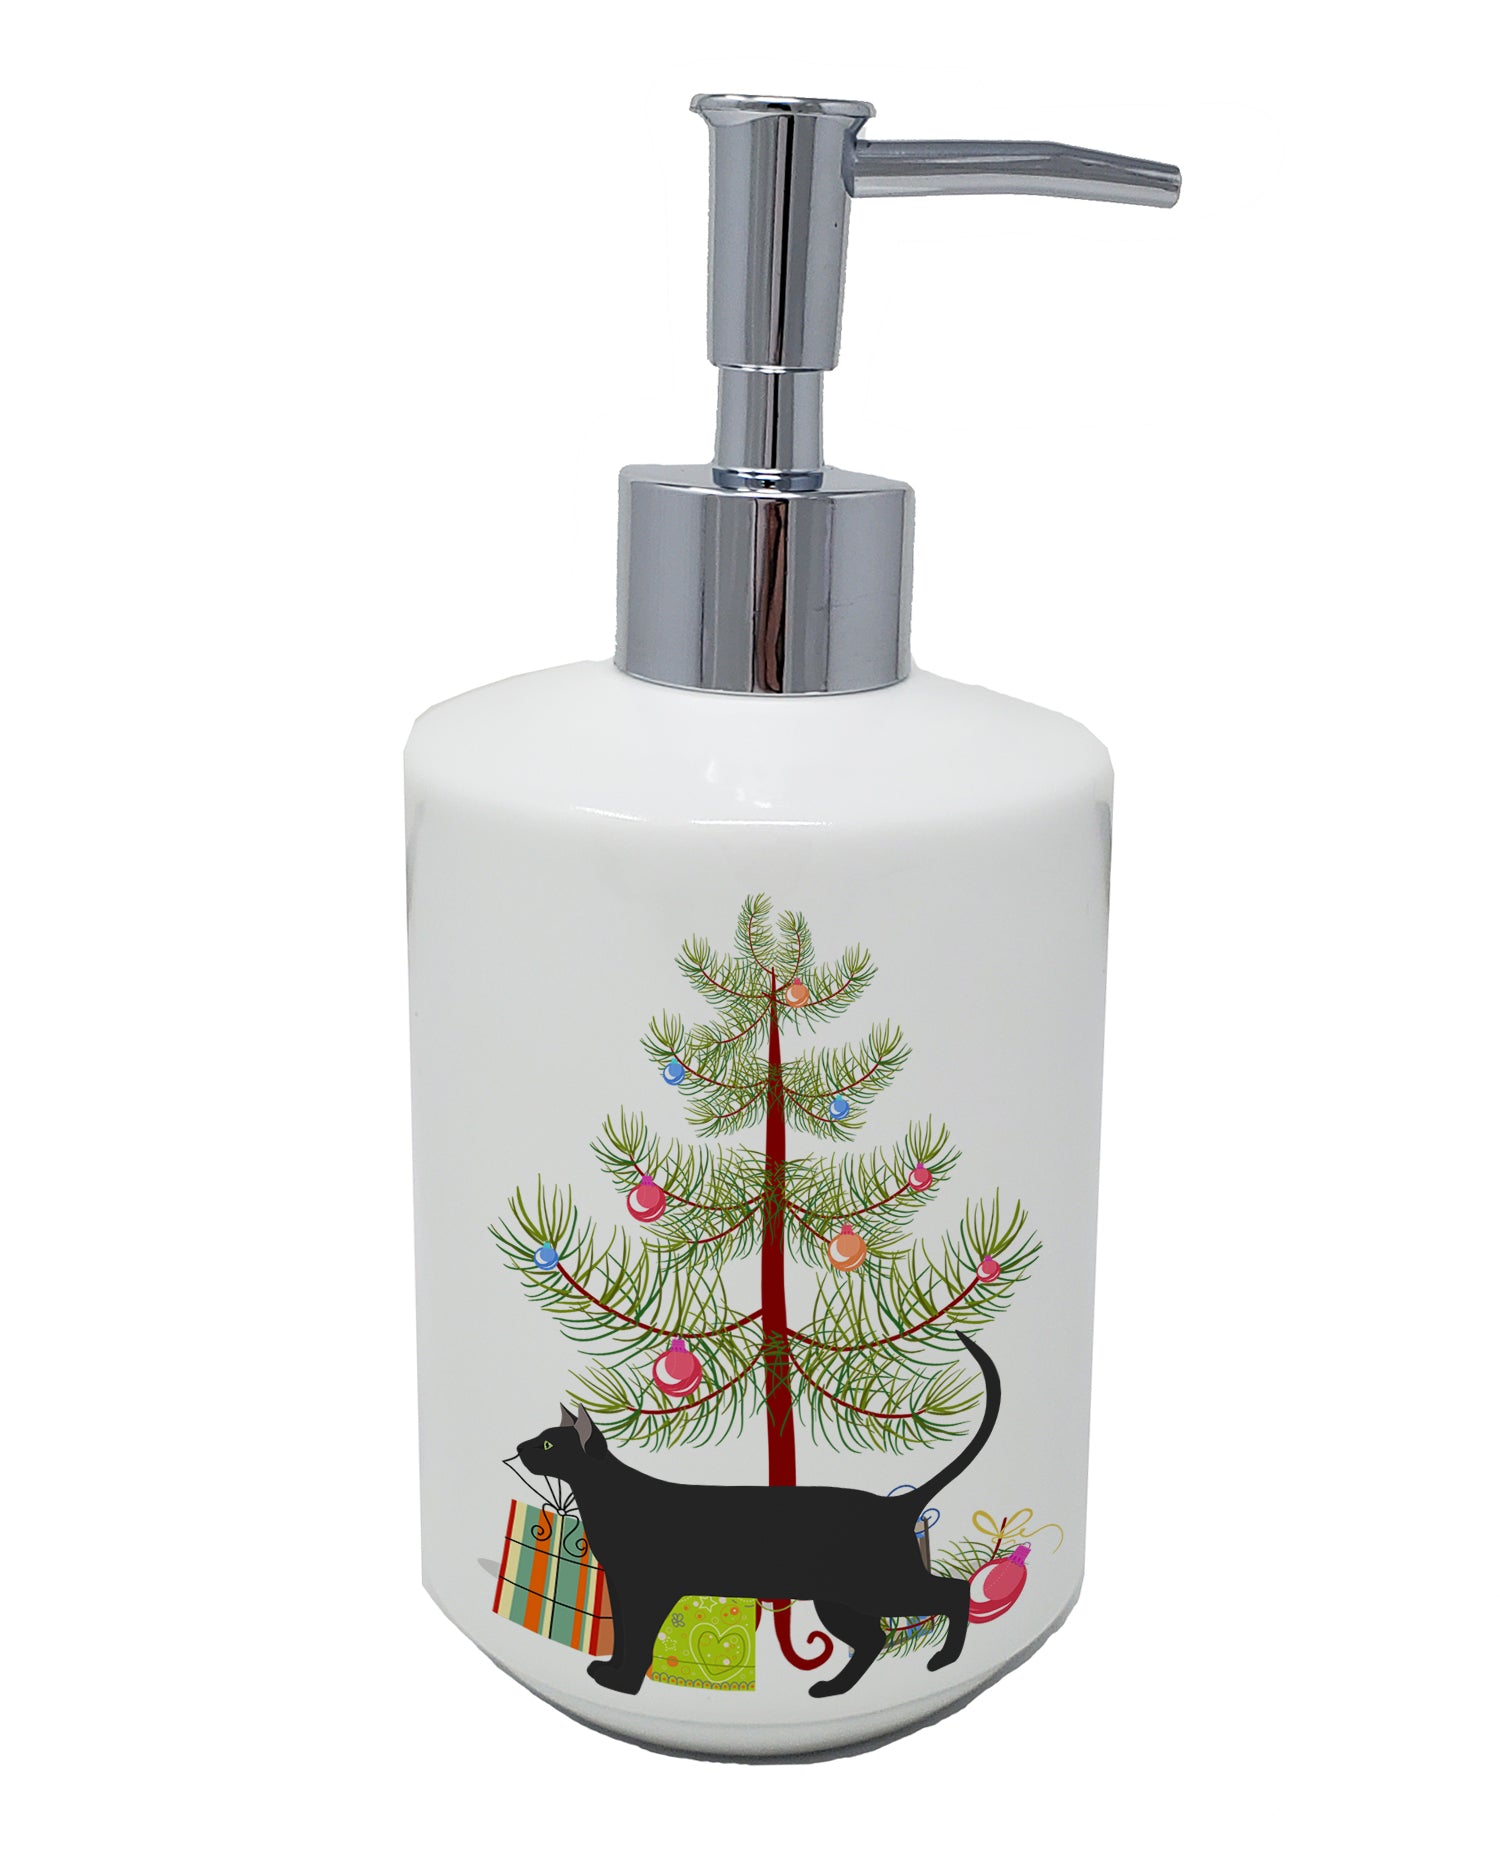 Buy this Pantherette Cat Merry Christmas Ceramic Soap Dispenser